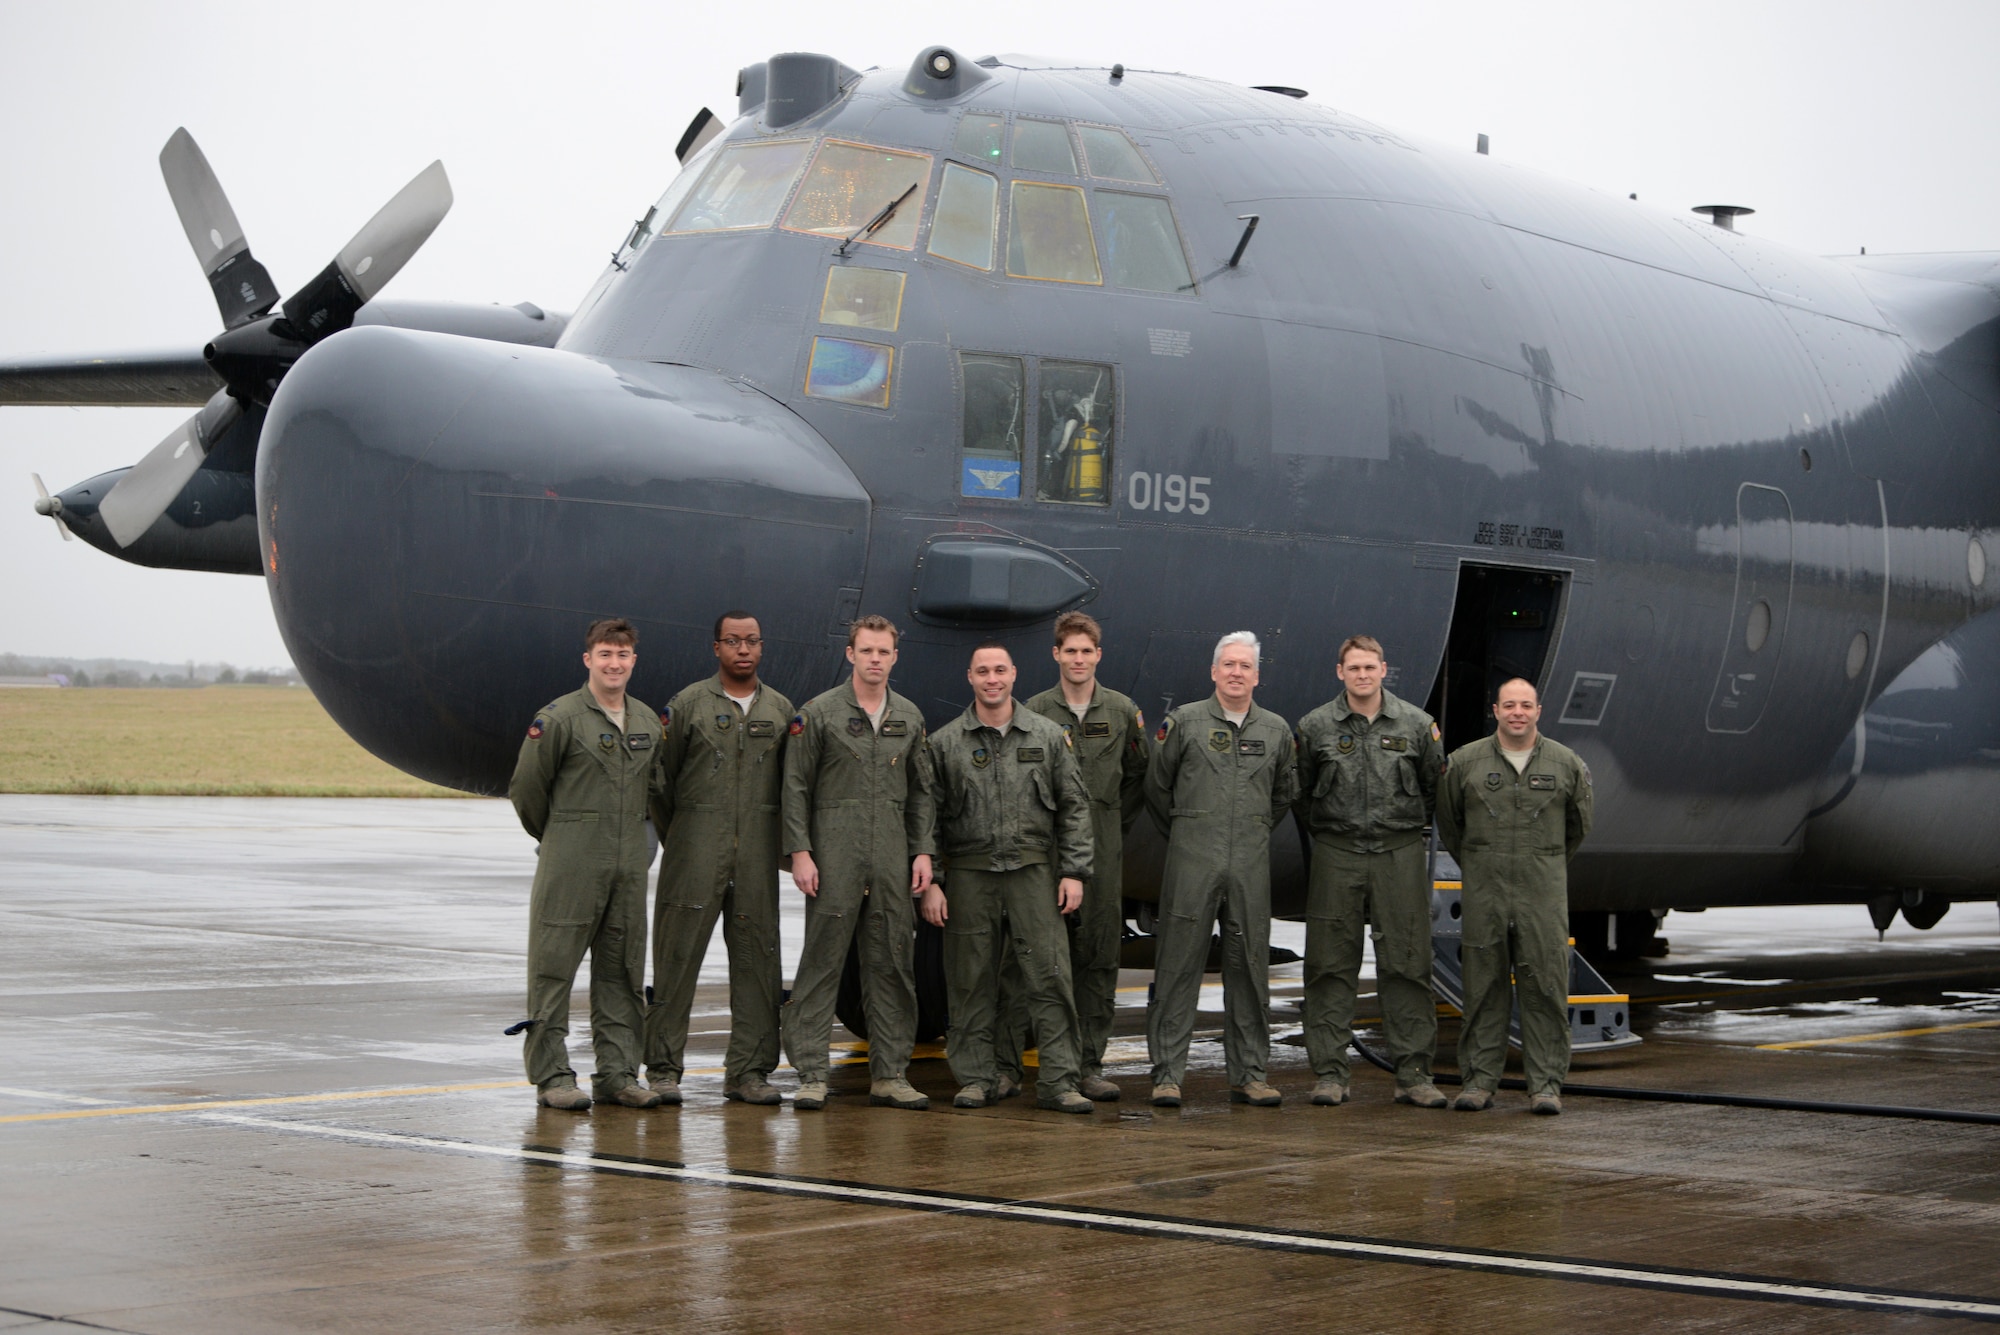 The aircrew prior to their departure flight Jan. 8, 2015, from RAF Mildenhall to Hurlburt Field, Florida. This is the last MC-130H Combat Talon II departure, thus ending its tenure at the 7th Special Operations Squadron at RAF Mildenhall. The MC-130H, tail number 0195, is the last of its kind to leave the European theater. (U.S. Air Force photo by Tech. Sgt. Stacia Zachary/Released)